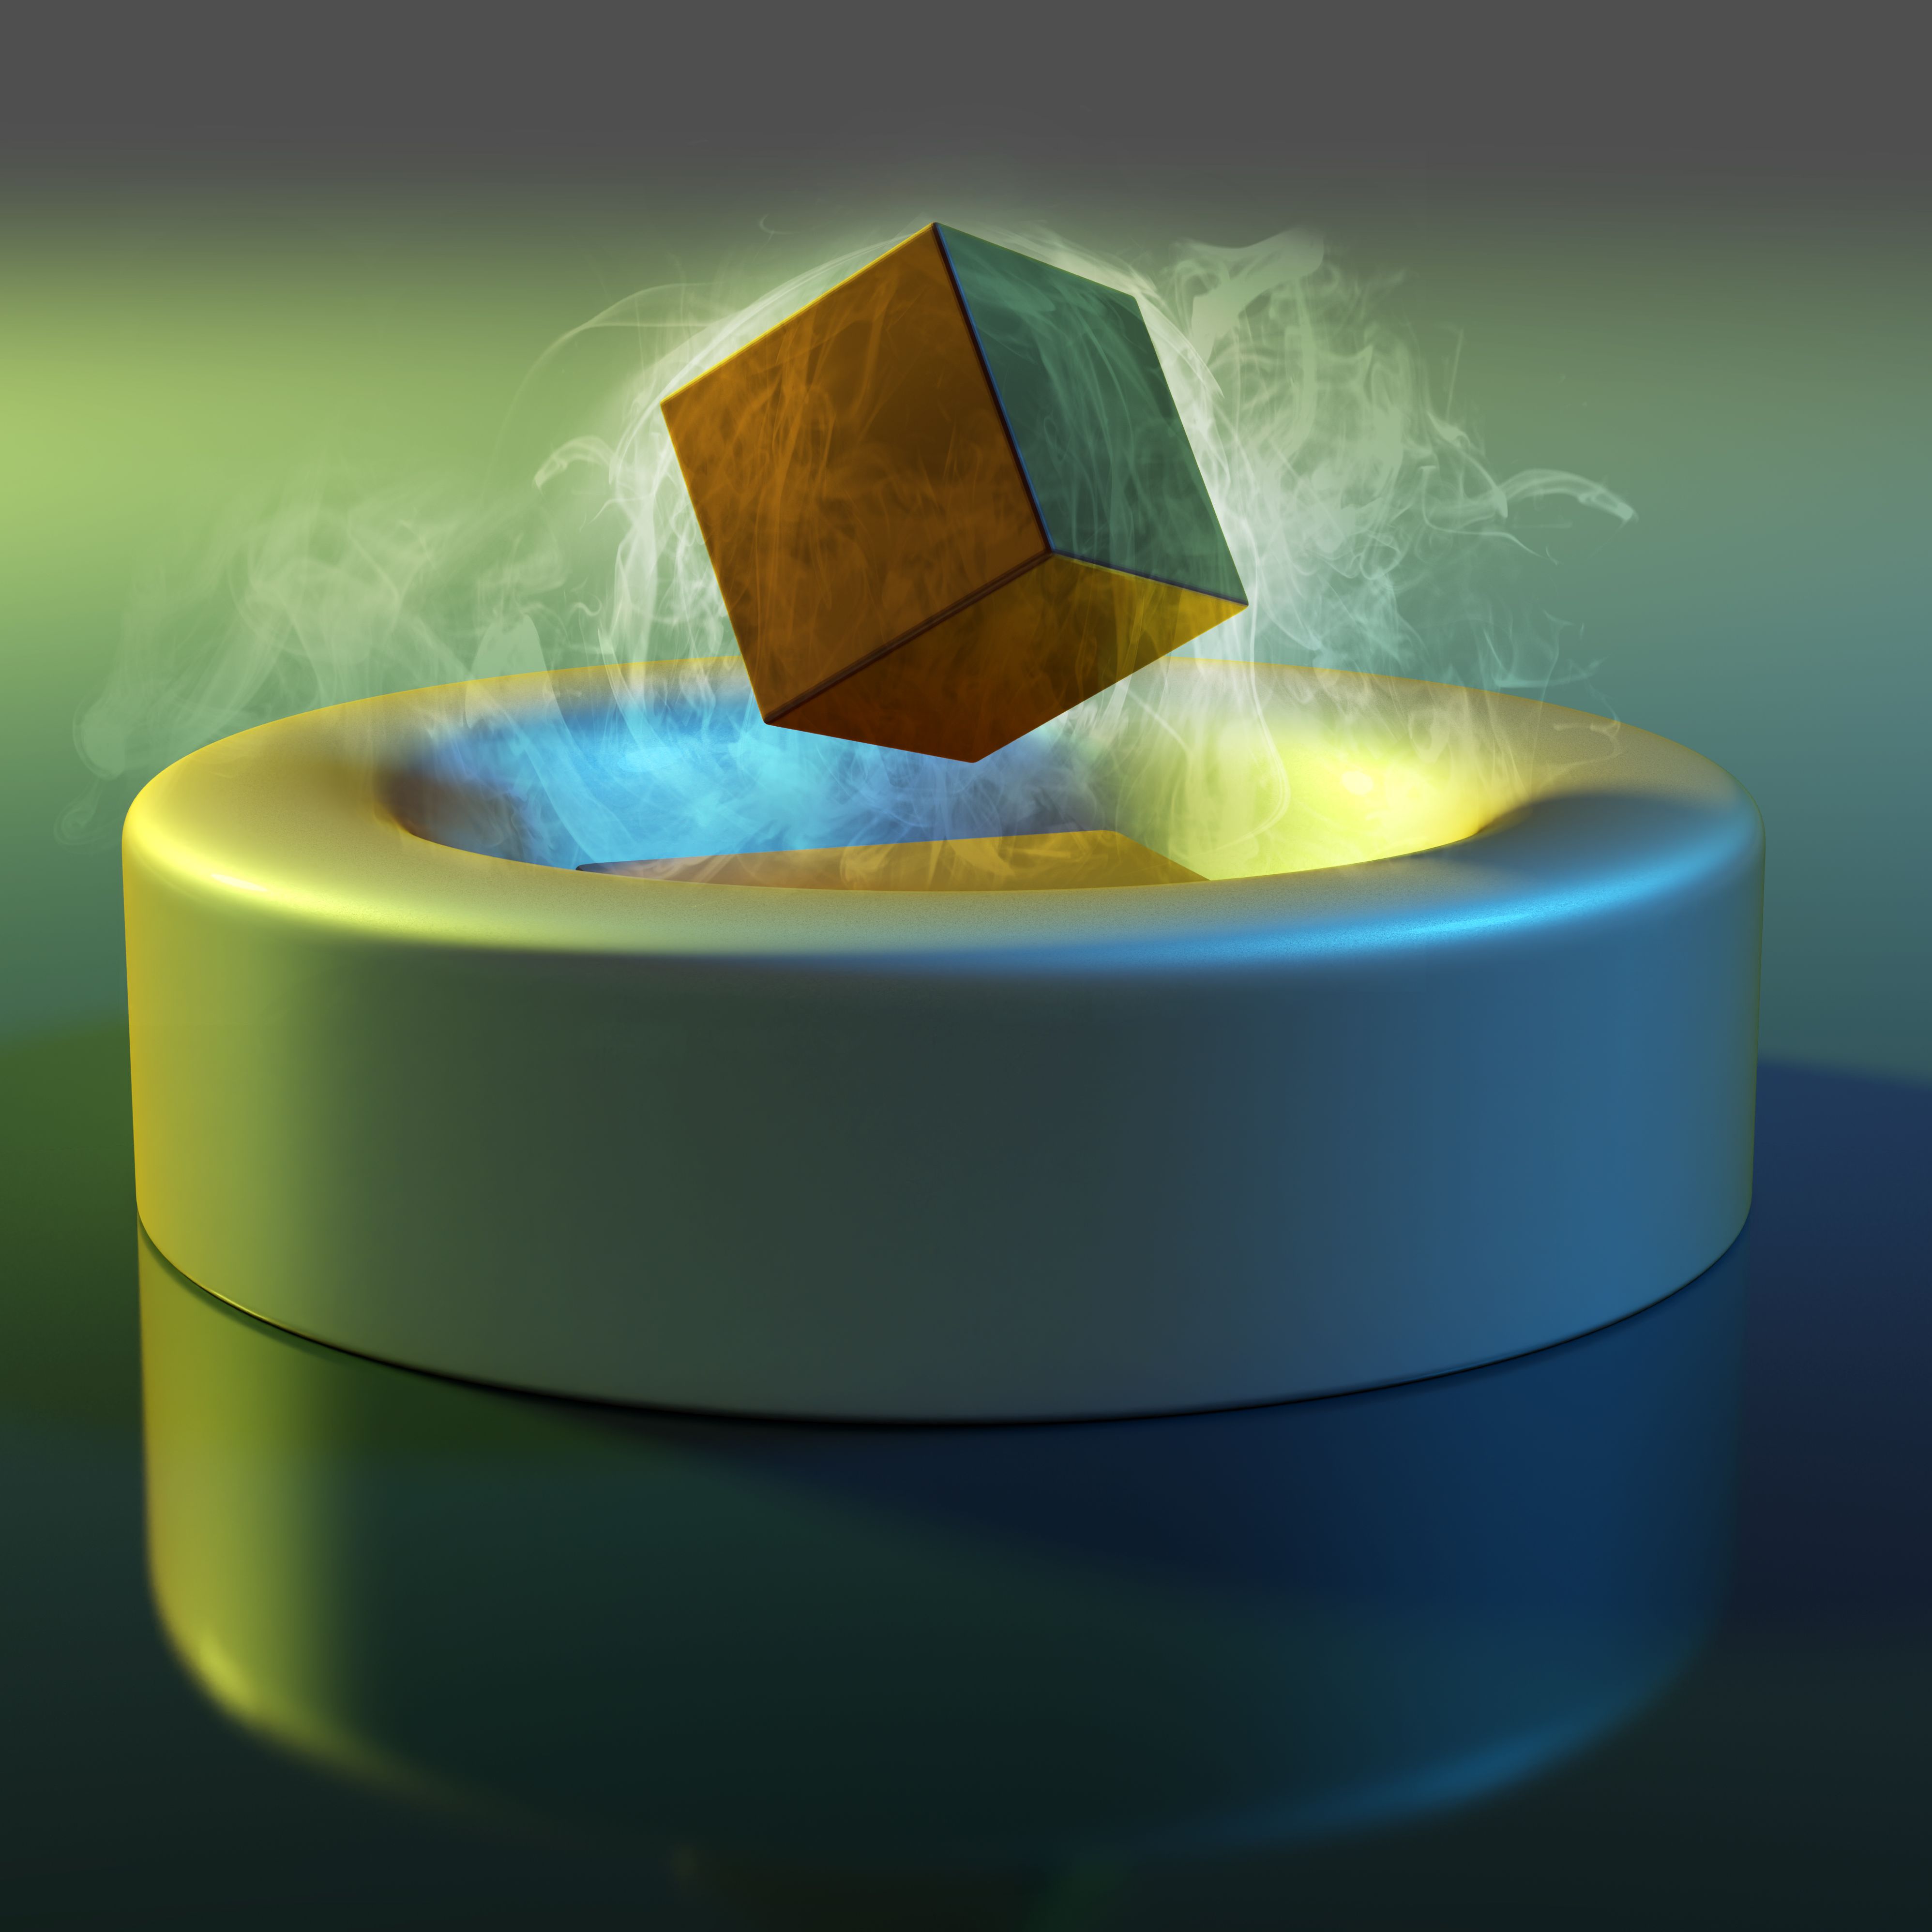 Why Scientists Are Obsessed With Finding a Room-Temperature Superconductor